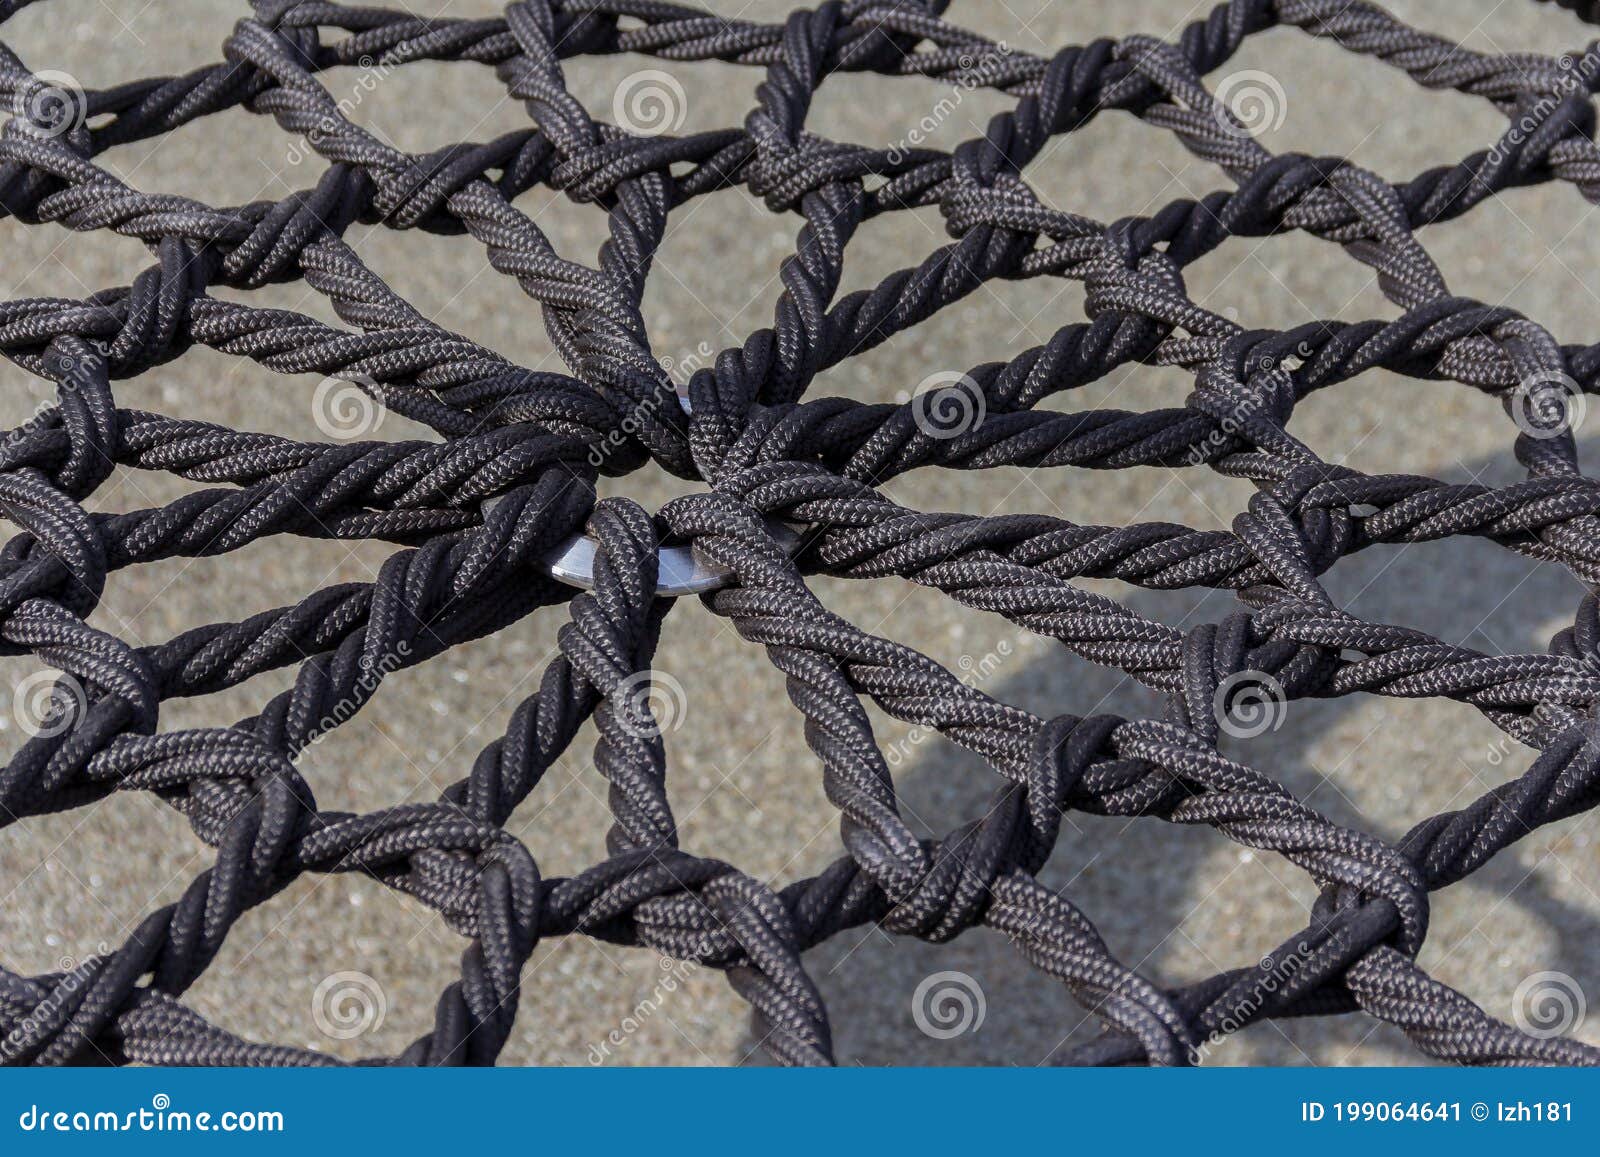 Braided Rope Background. Hand Weaving Rope with Patterns. DIY and